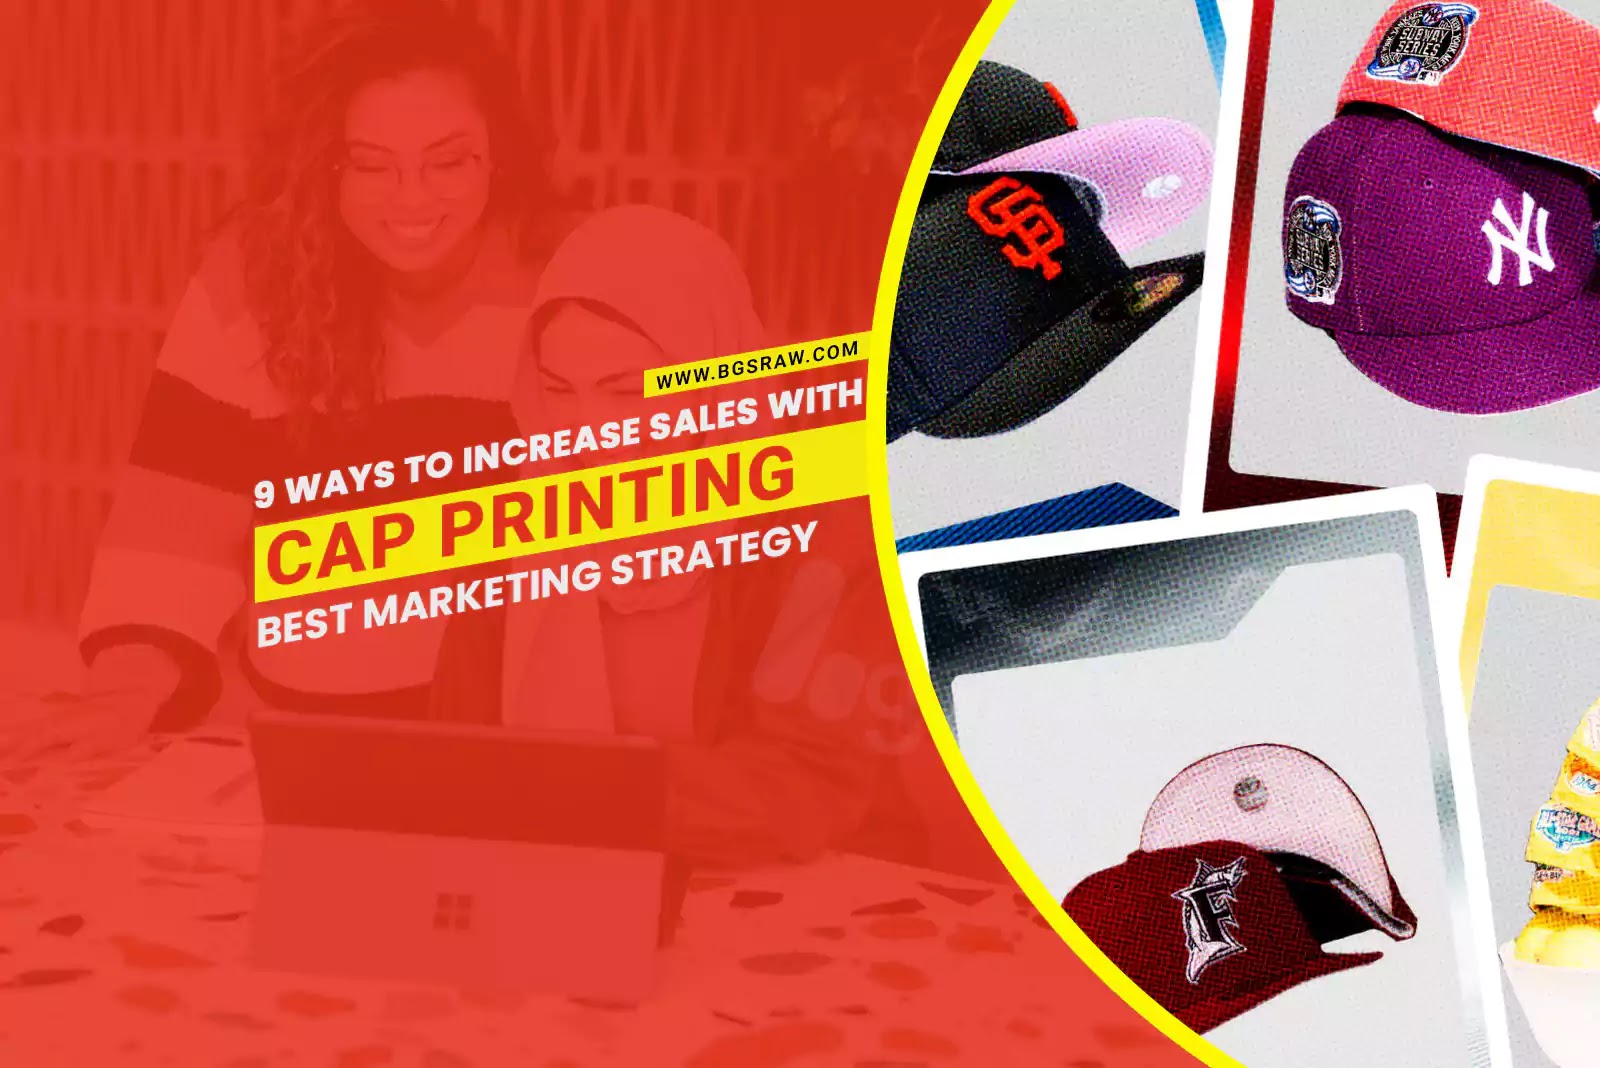 Best Marketing Strategy: 9 Ways to Increase Sales with Cap Printing in 2023